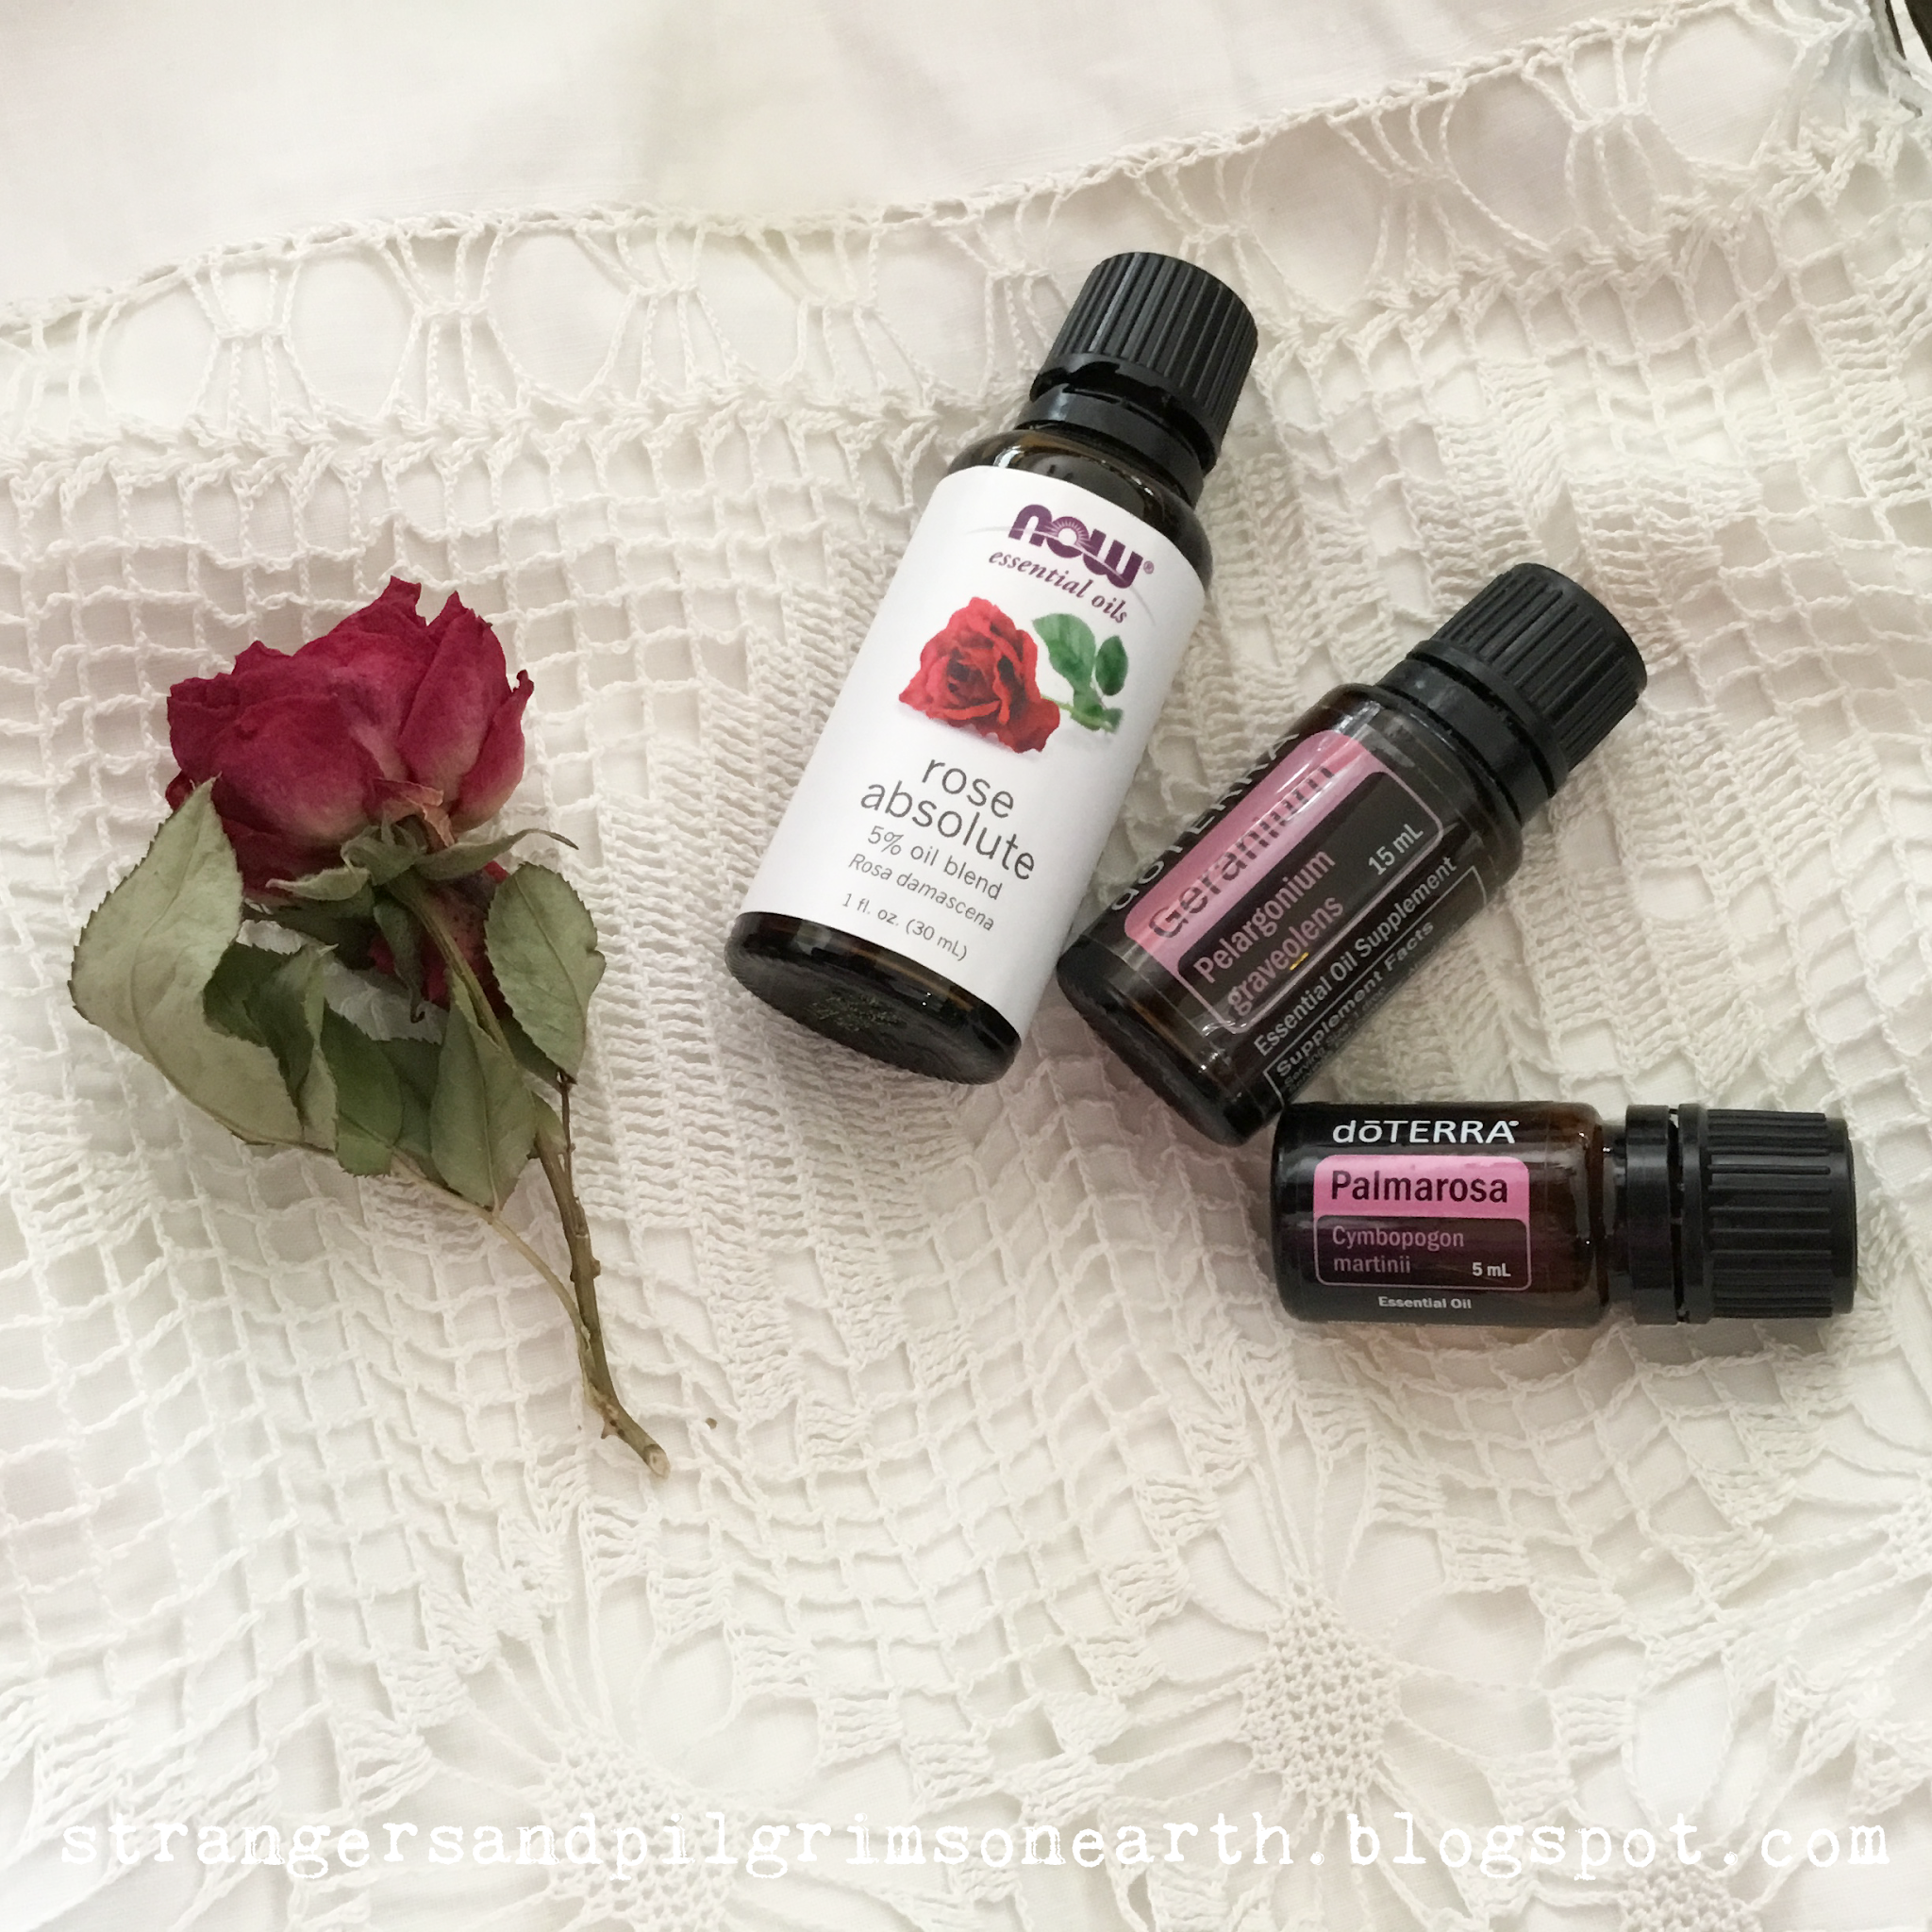 10 Rose Absolute Essential Oil Recipes - DIY Aromatherapy Blends